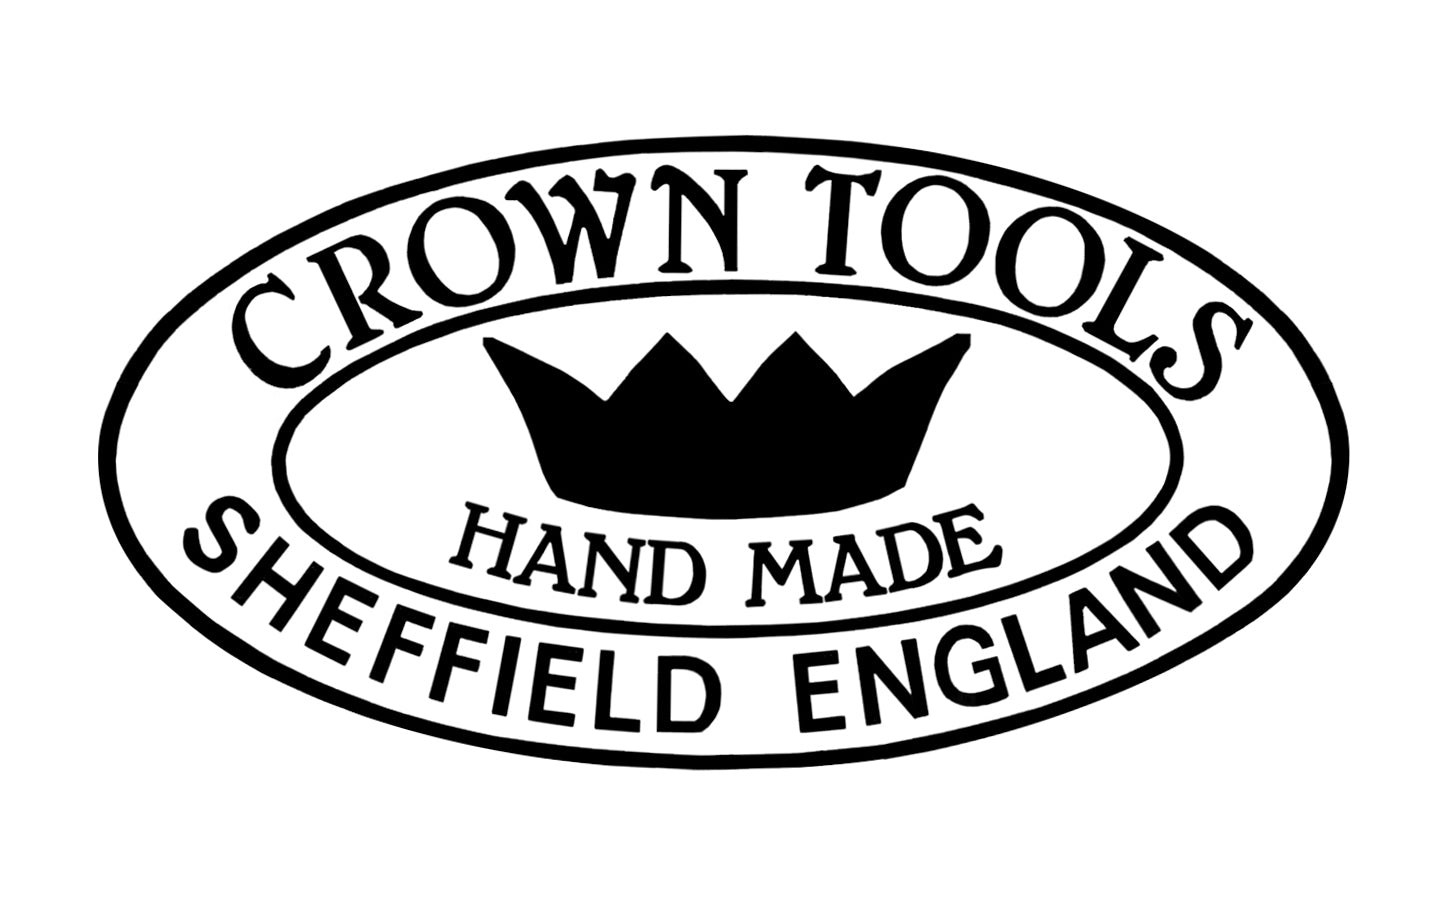 This Crown Tools 10-1/2